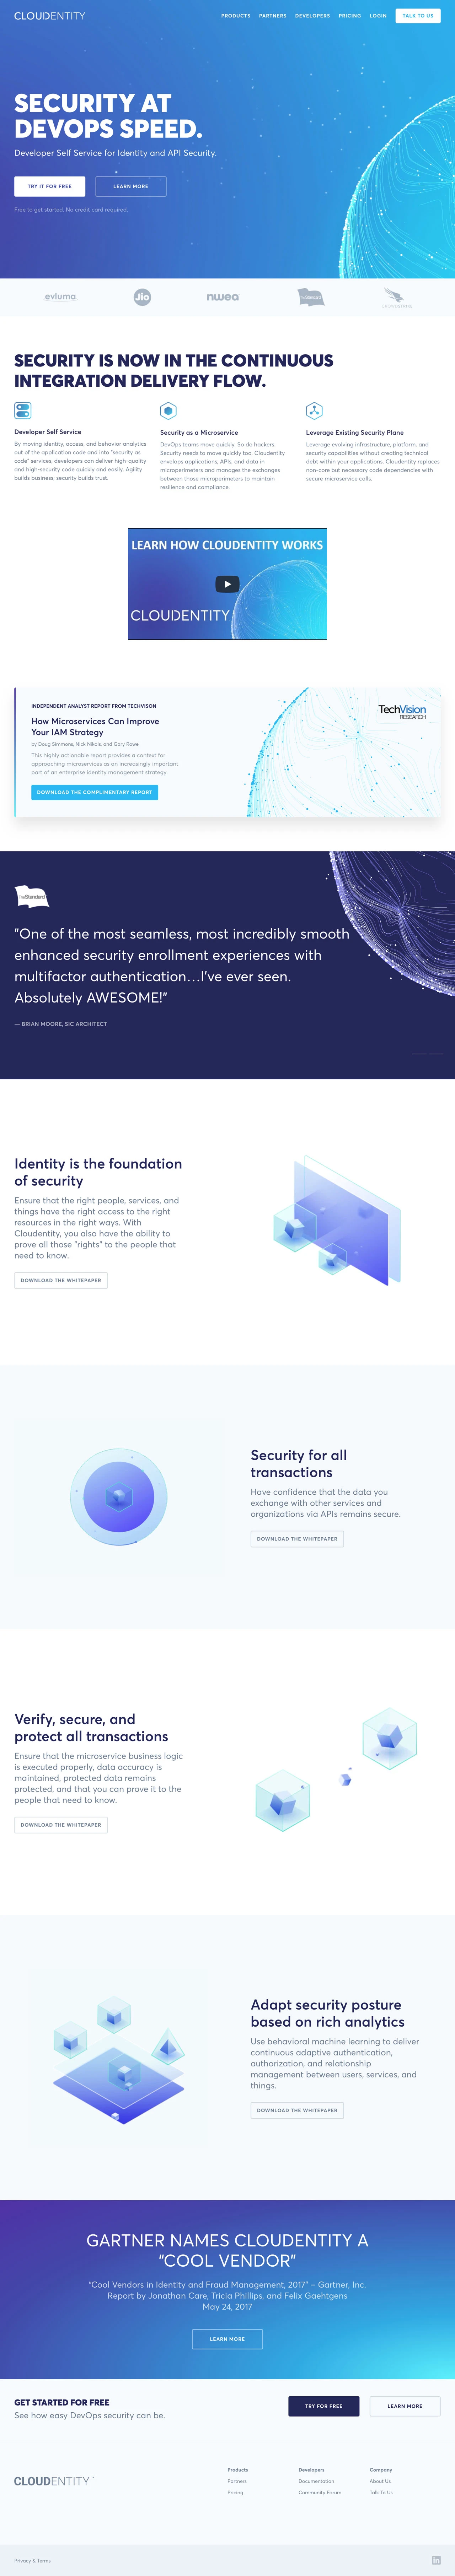 Cloudentity Landing Page Example: DevOps teams moves fast, but so do hackers. You need cloud security that can keep up. Cloudentity creates microperimeters around applications, data, and APIs and provides next-level cloud identity management services.